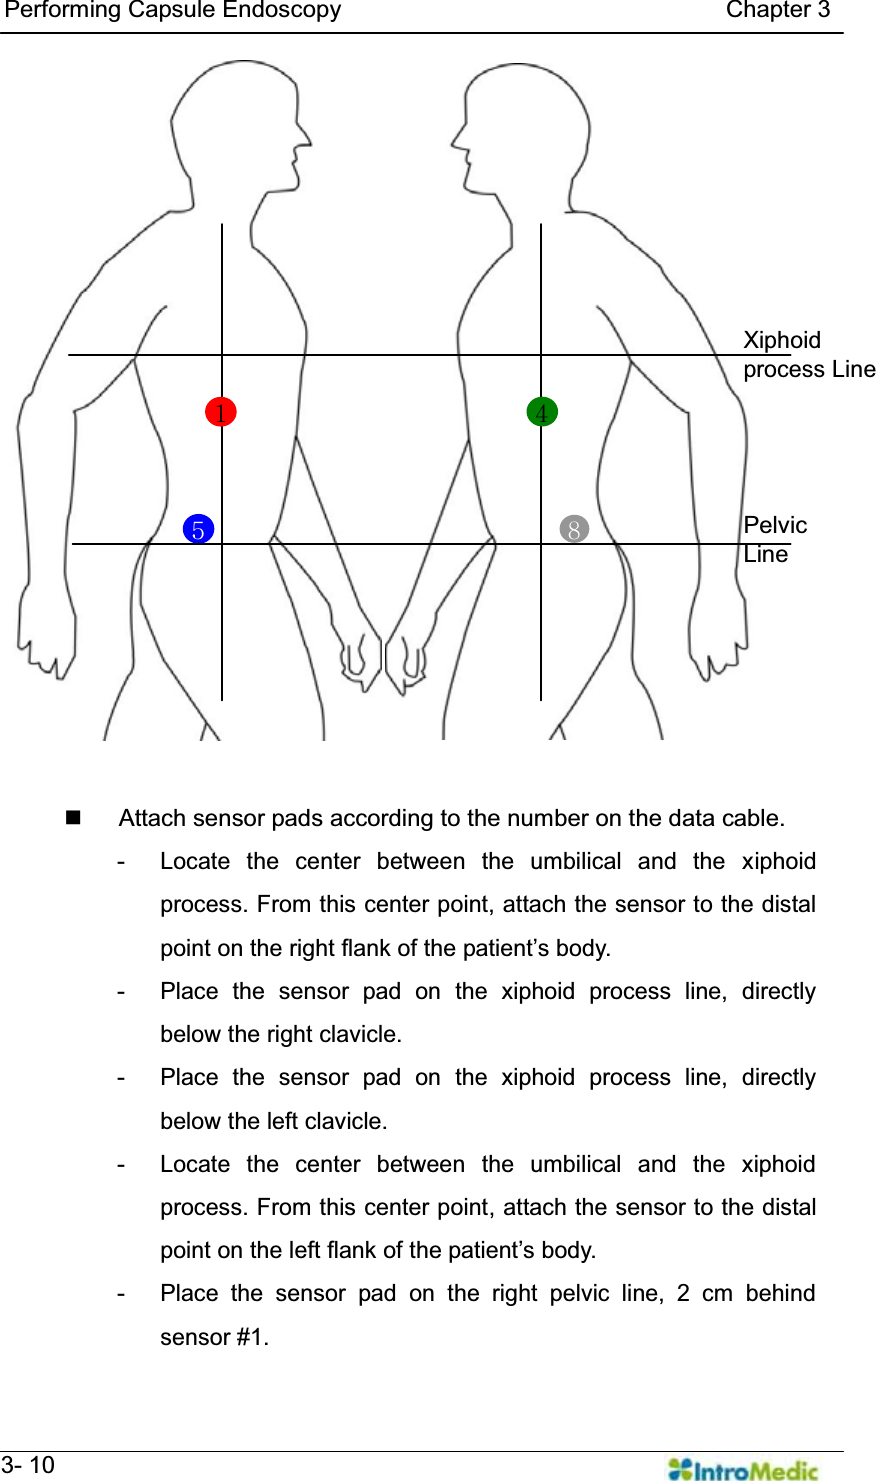   Performing Capsule Endoscopy                                Chapter 3   3- 10     3.5.2                  Attach sensor pads according to the number on the data cable. - Locate the center between the umbilical and the xiphoid process. From this center point, attach the sensor to the distal SRLQWRQWKHULJKWIODQNRIWKHSDWLHQW¶VERG\ - Place the sensor pad on the xiphoid process line, directly below the right clavicle. - Place the sensor pad on the xiphoid process line, directly below the left clavicle. - Locate the center between the umbilical and the xiphoid process. From this center point, attach the sensor to the distal SRLQWRQWKHOHIWIODQNRIWKHSDWLHQW¶VERG\ - Place the sensor pad on the right pelvic line, 2 cm behind sensor #1. 5 8  Pelvic Line Xiphoid process Line 1  4 